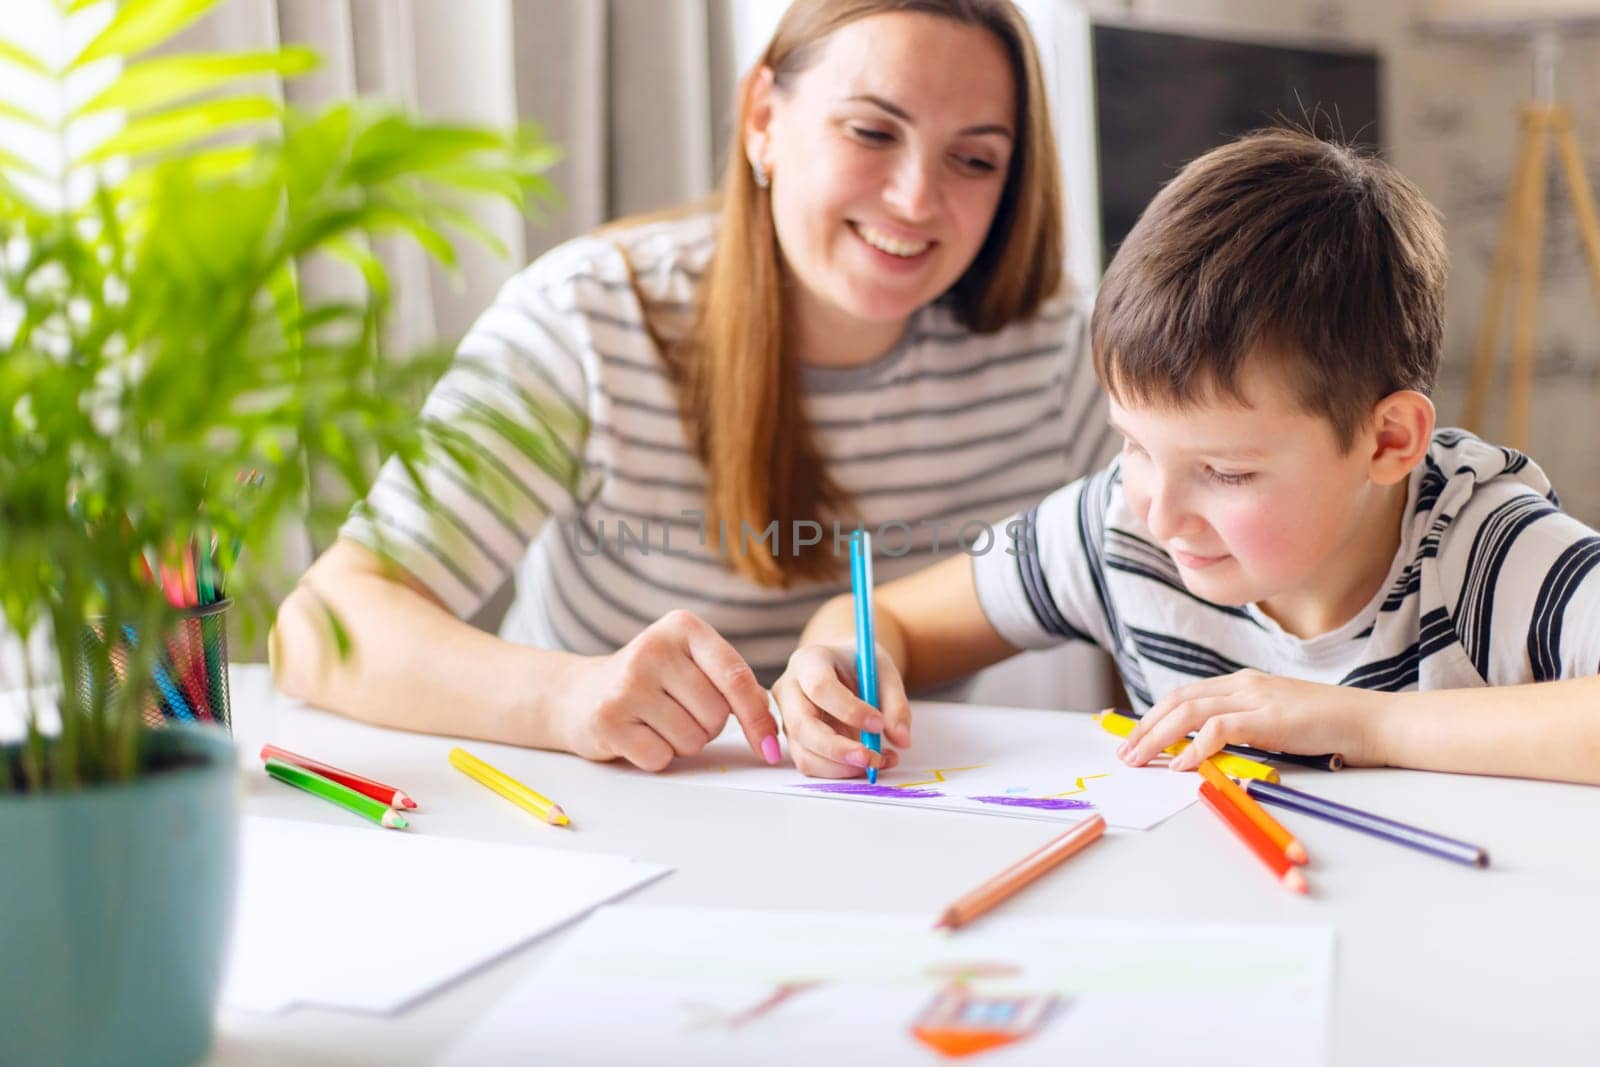 Happy young mother and her son engaged in creative drawing activities at home, surrounded by colorful pencils.